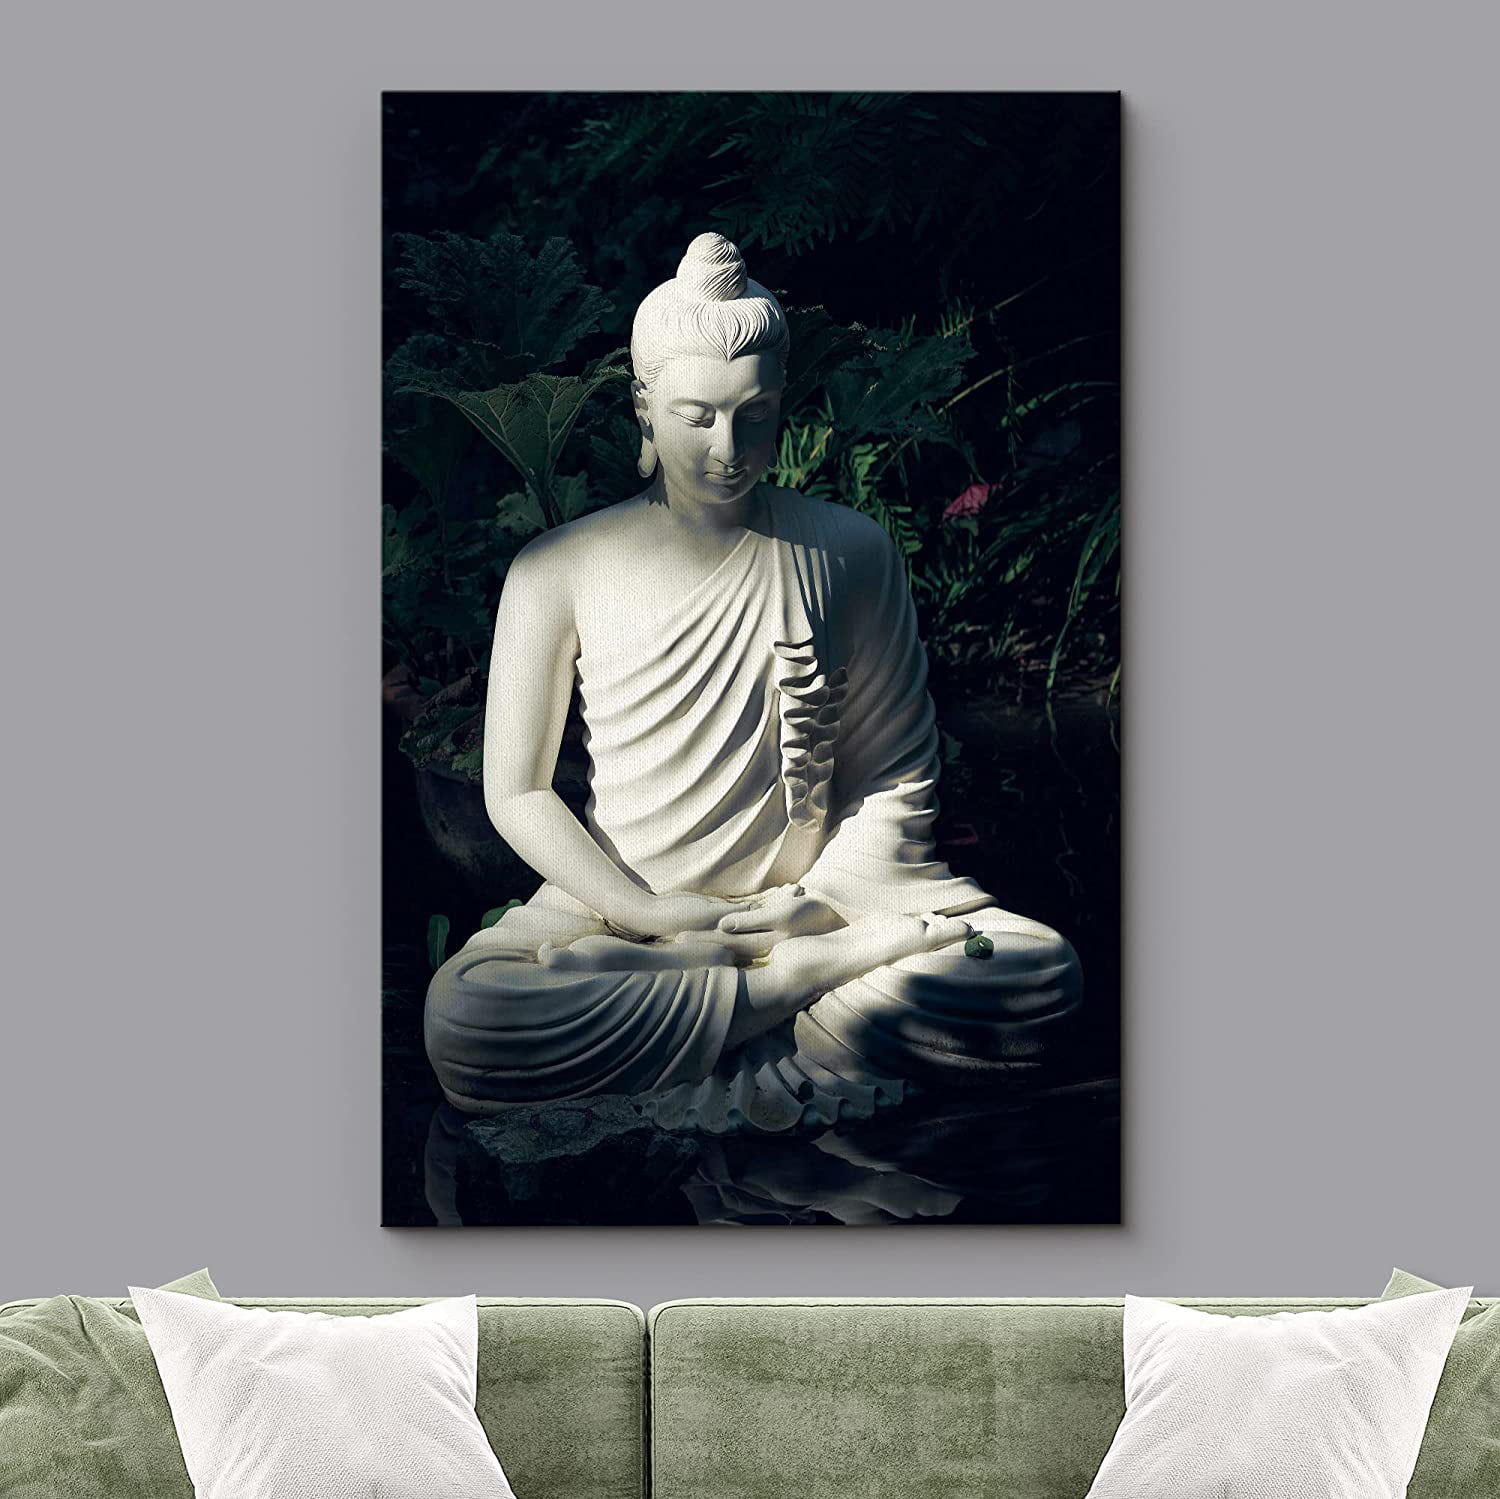 wall26 Canvas Print Wall Art Meditating Buddhism Buddha Statue Jungle  Shadows Cultural Religious Photography Realism Decorative Yoga Multicolor  Relax/Calm for Living Room, Bedroom, Office - 32"x 